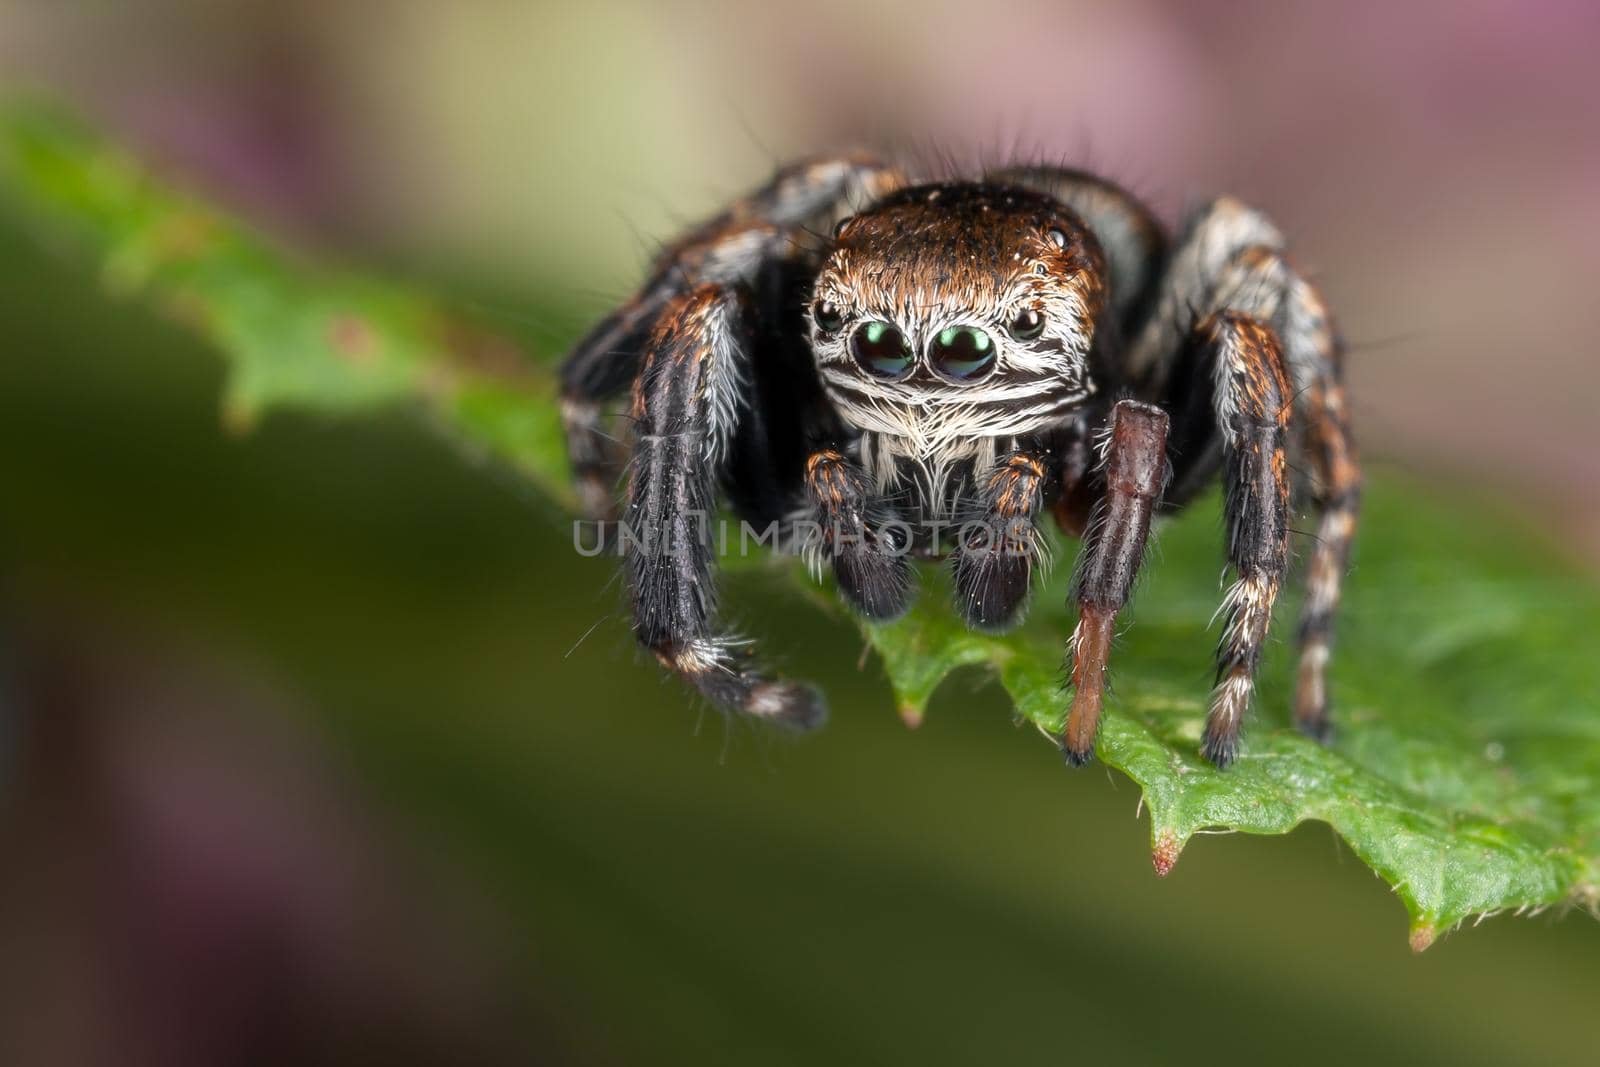 Jumping spider on the leaf edge ready to jump down by Lincikas